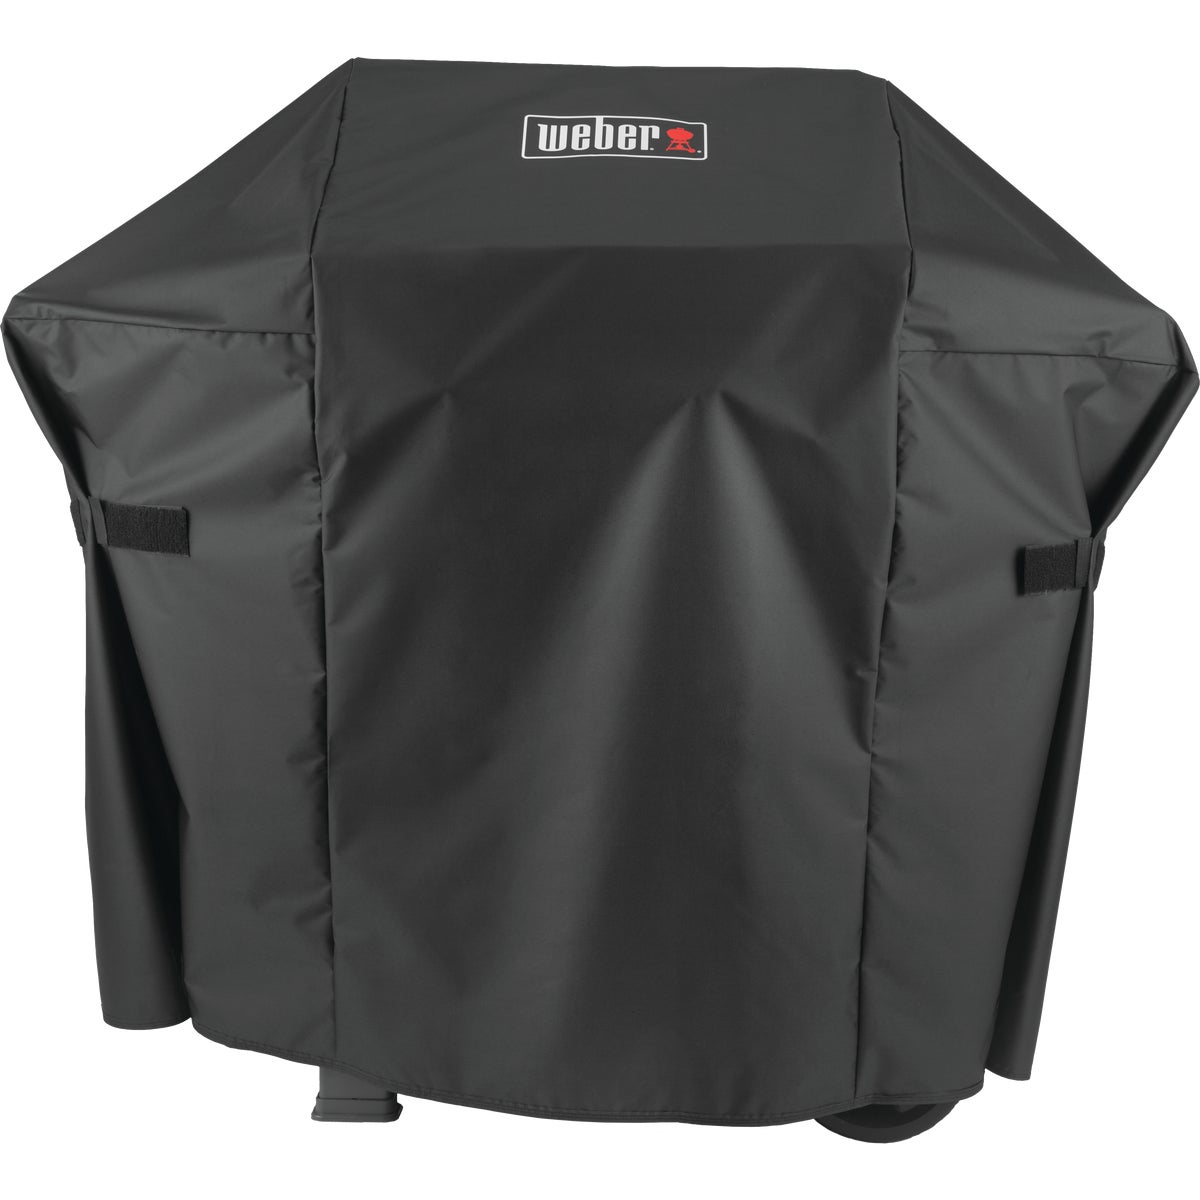 Item 800030, 2-burner gas grill cover is a breathable, weather resistant cover that 